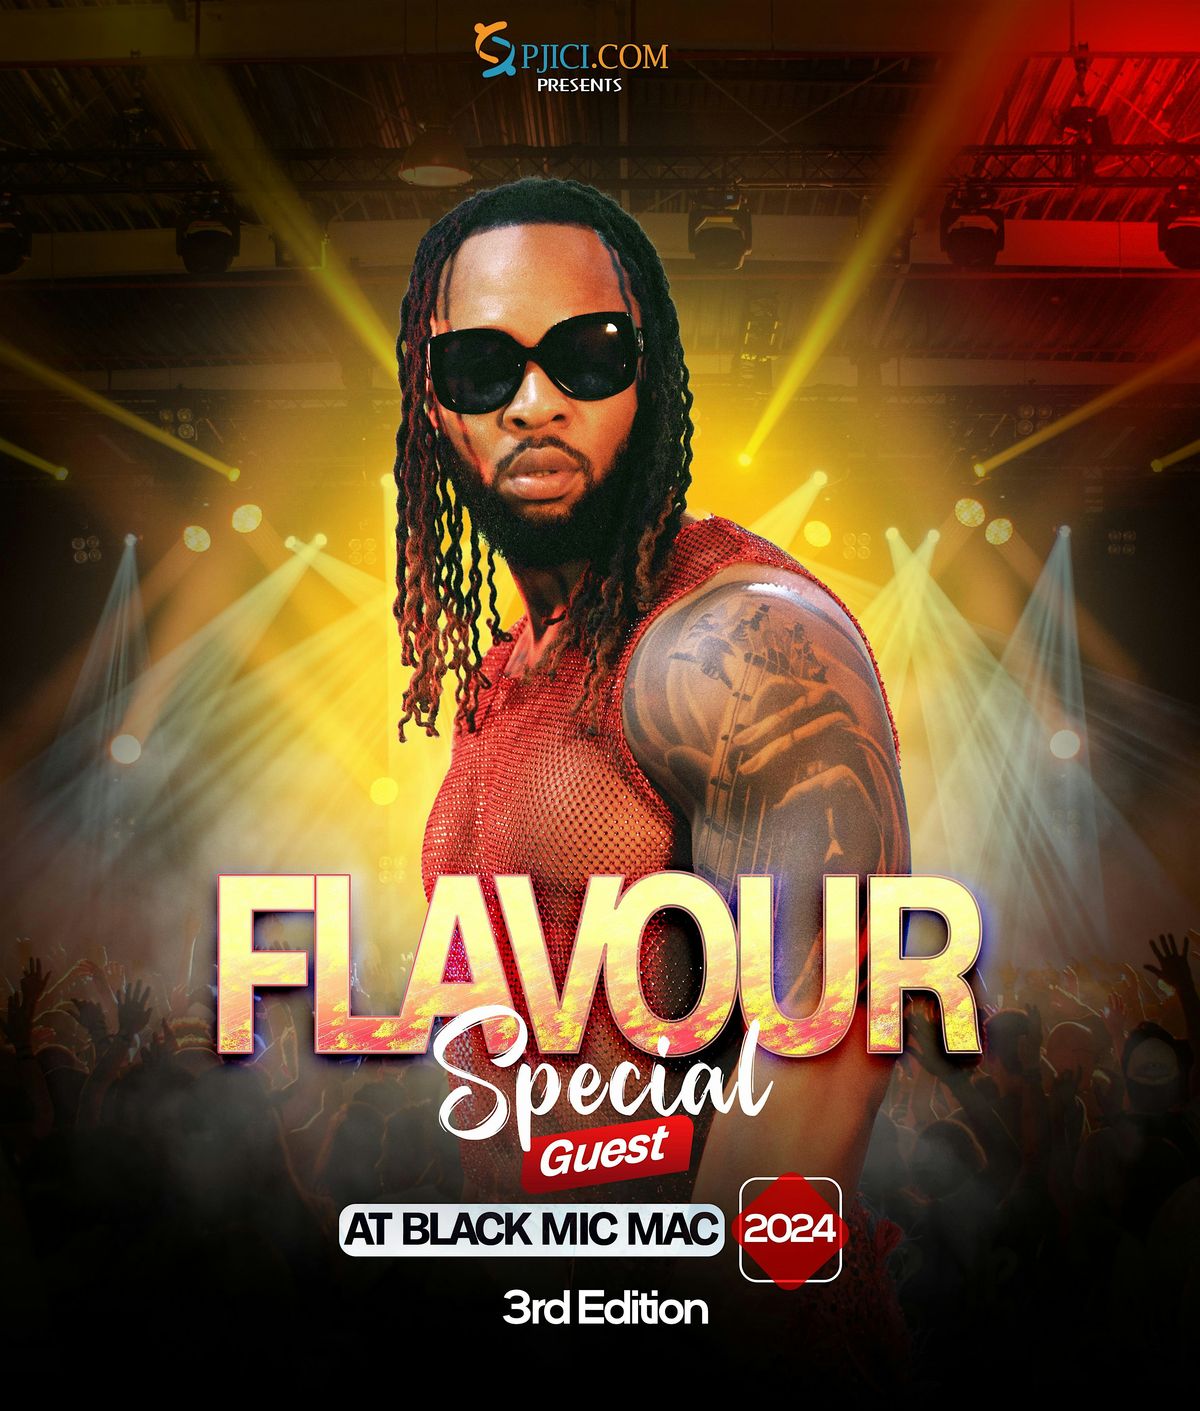 FLAVOUR Live in concert at Black Mic Mac Festival